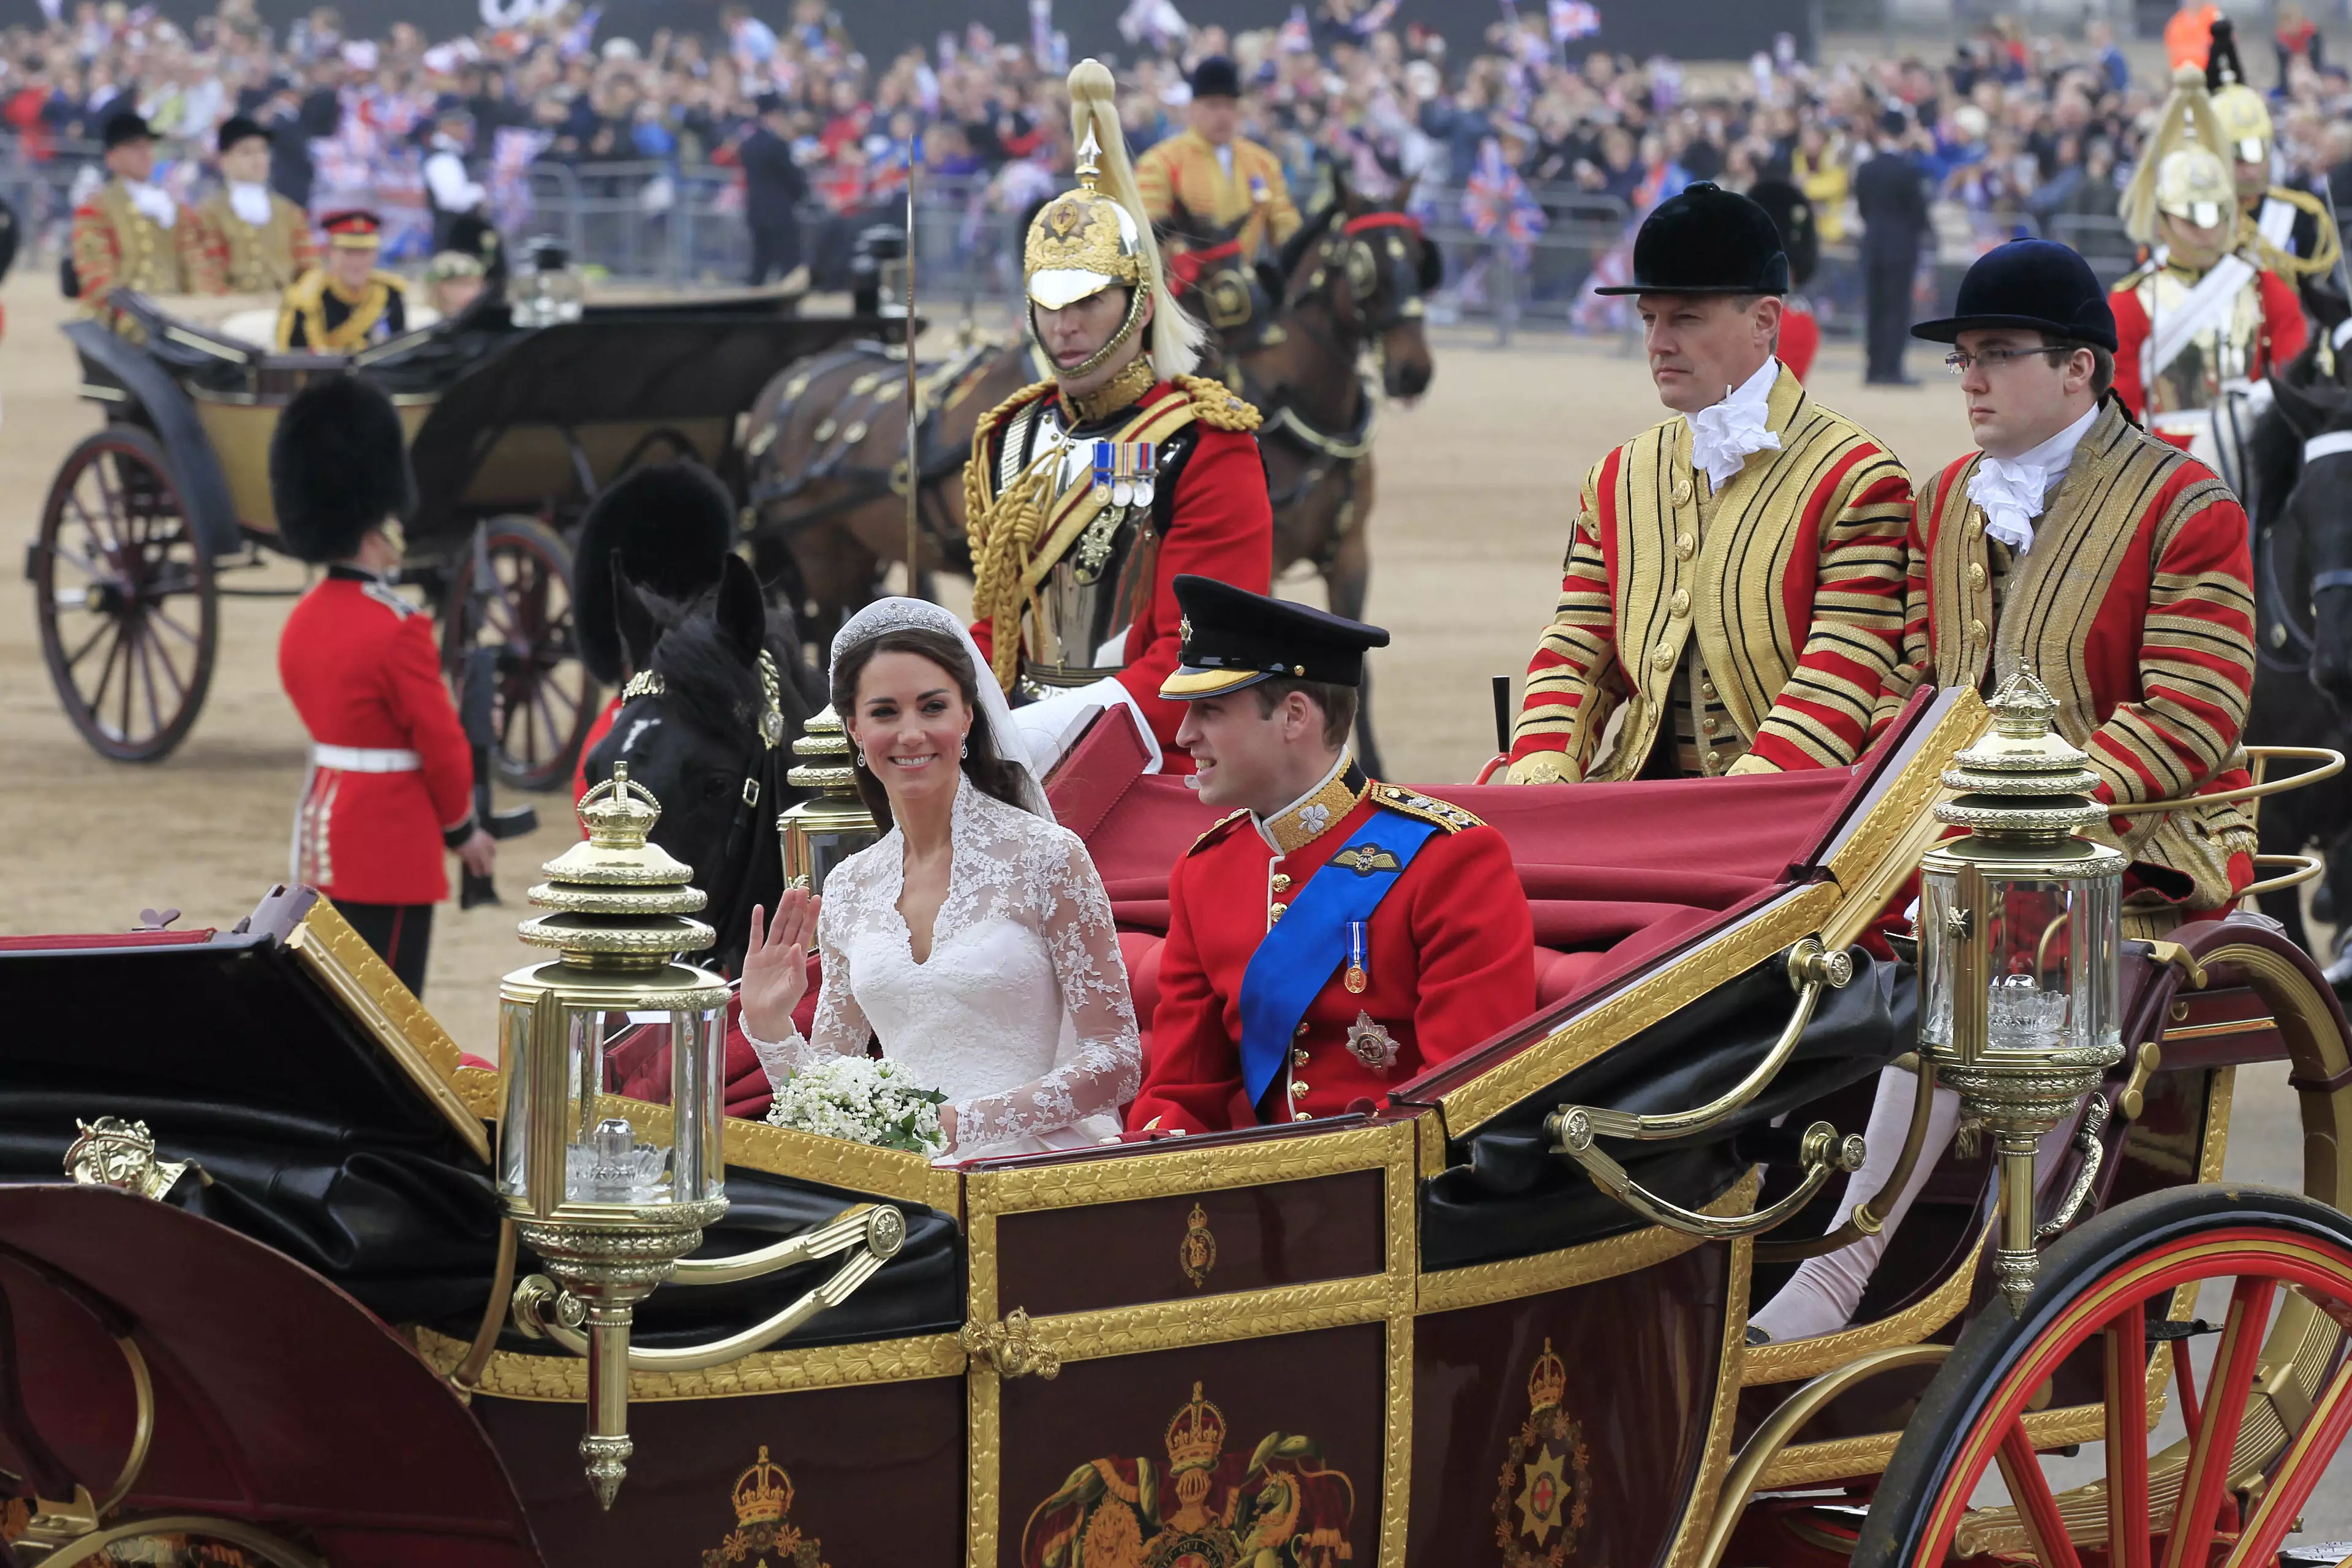 William and Kate's wedding was watched by millions of people across the world (